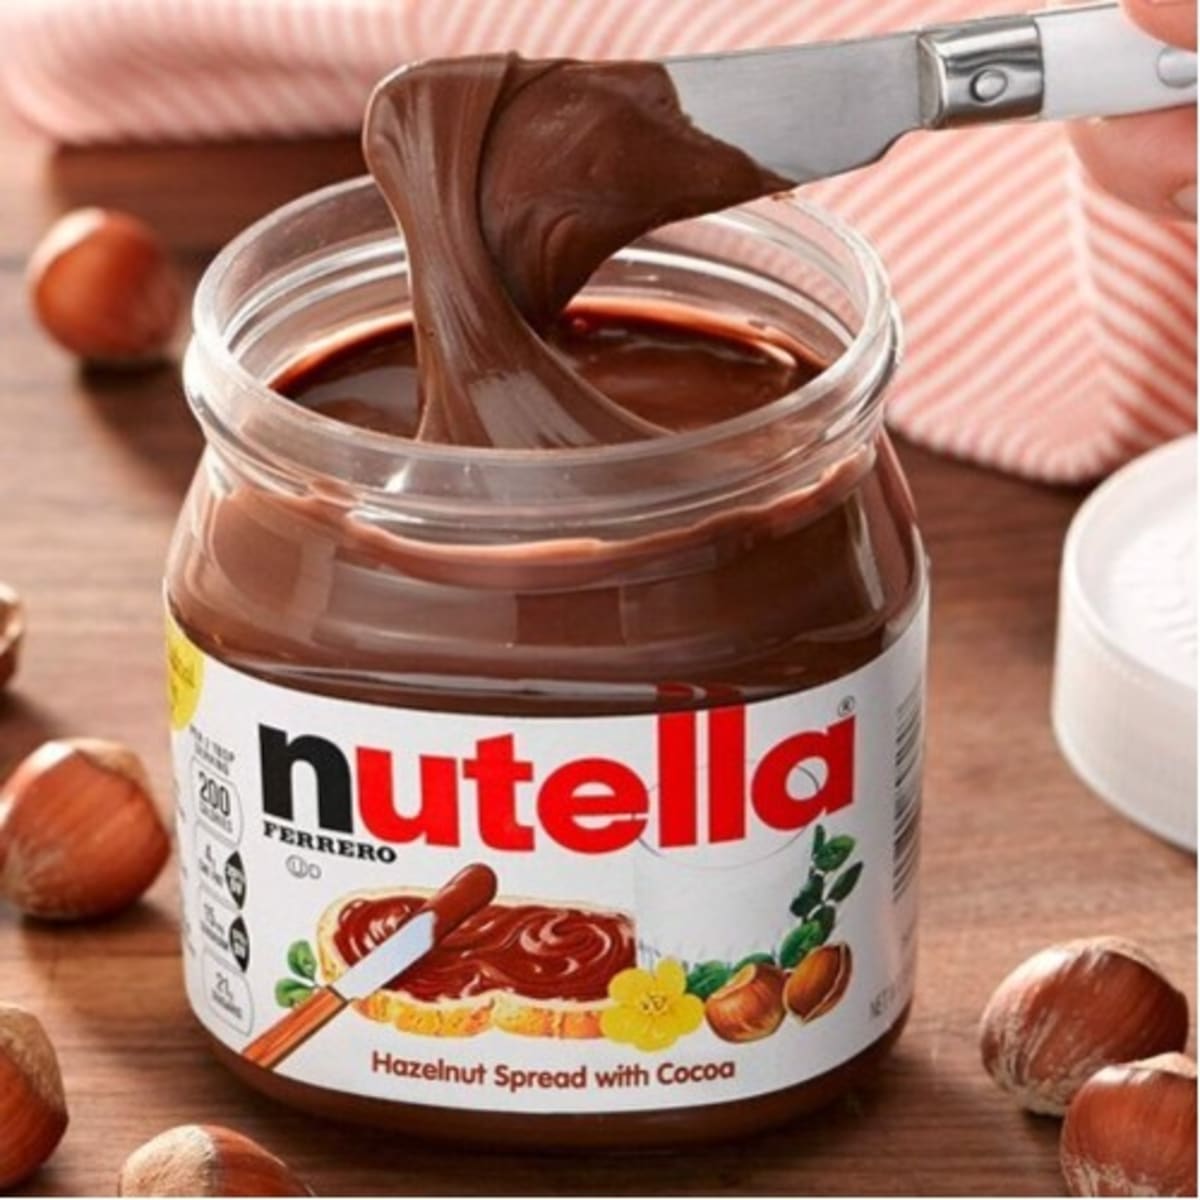 Nutella Hazelnut Spread with Cocoa 1kg Online at Best Price, Choco Spread